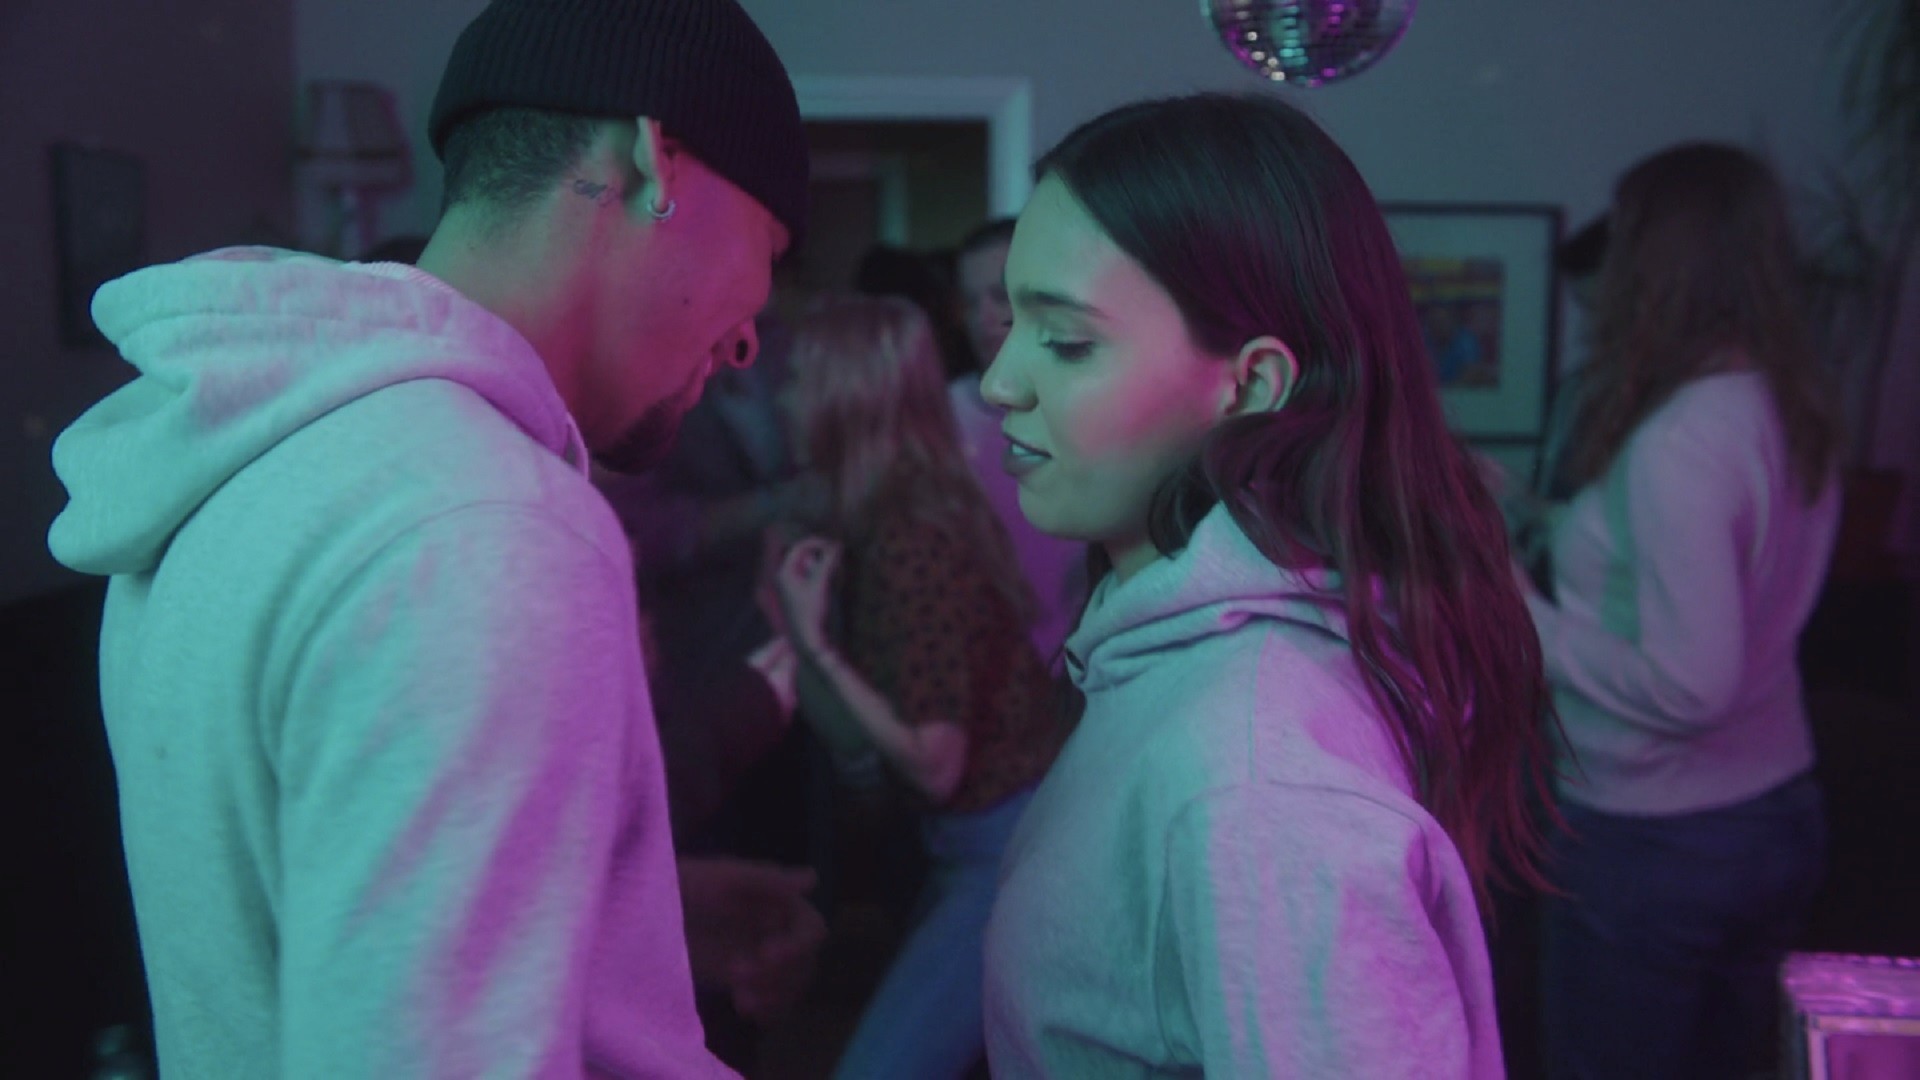 1920x1080 Camilo, from the projects outside of Stockholm, sees Amina on her way to a  party. He borrows his friend's expensive jacket and approaches her, ...